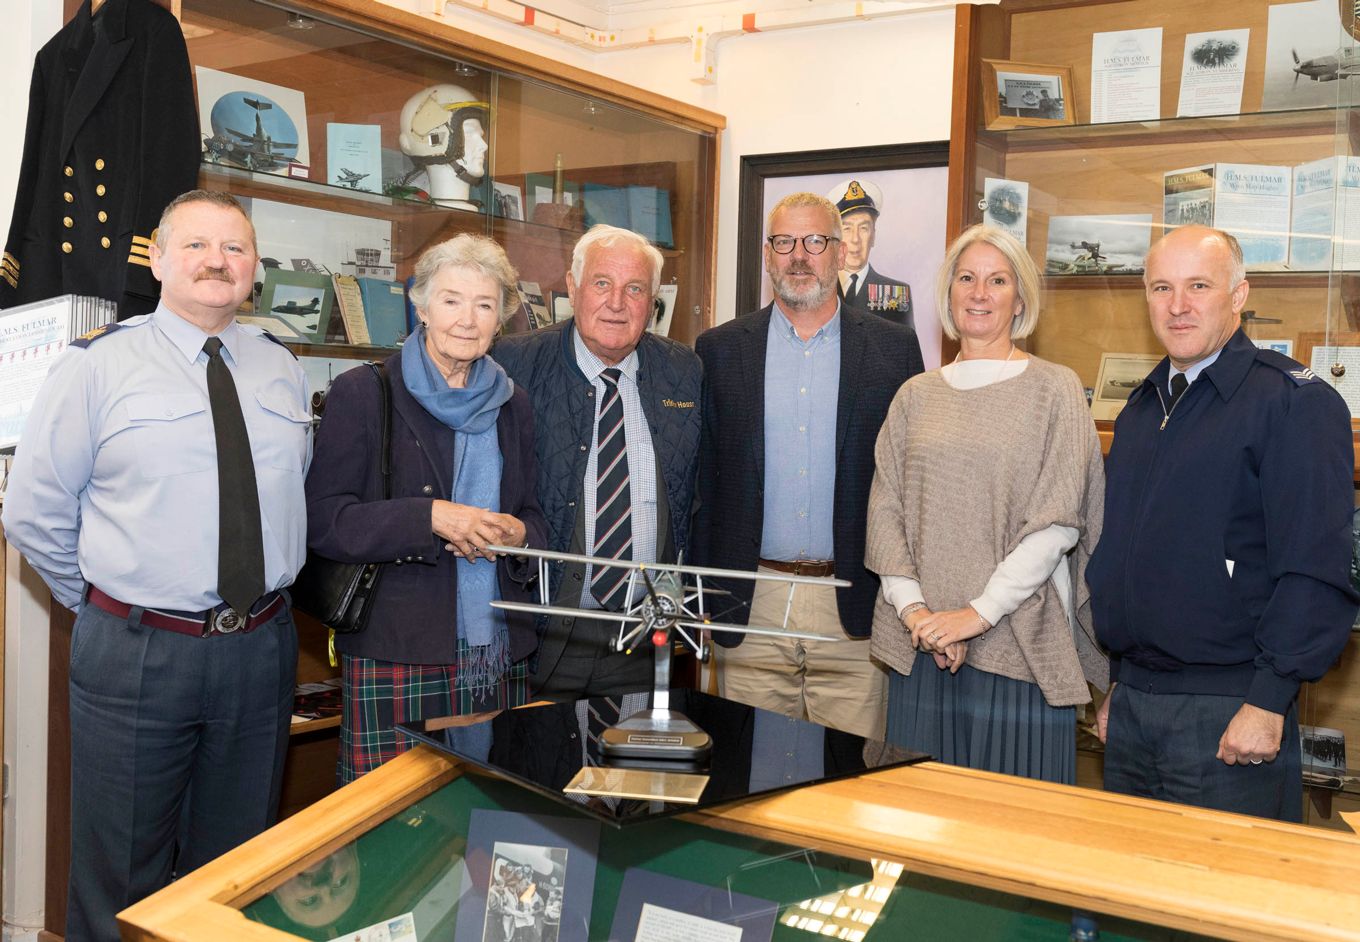 Members of the Stephens family donate a model aircraft to RAF Lossiemouth personnel